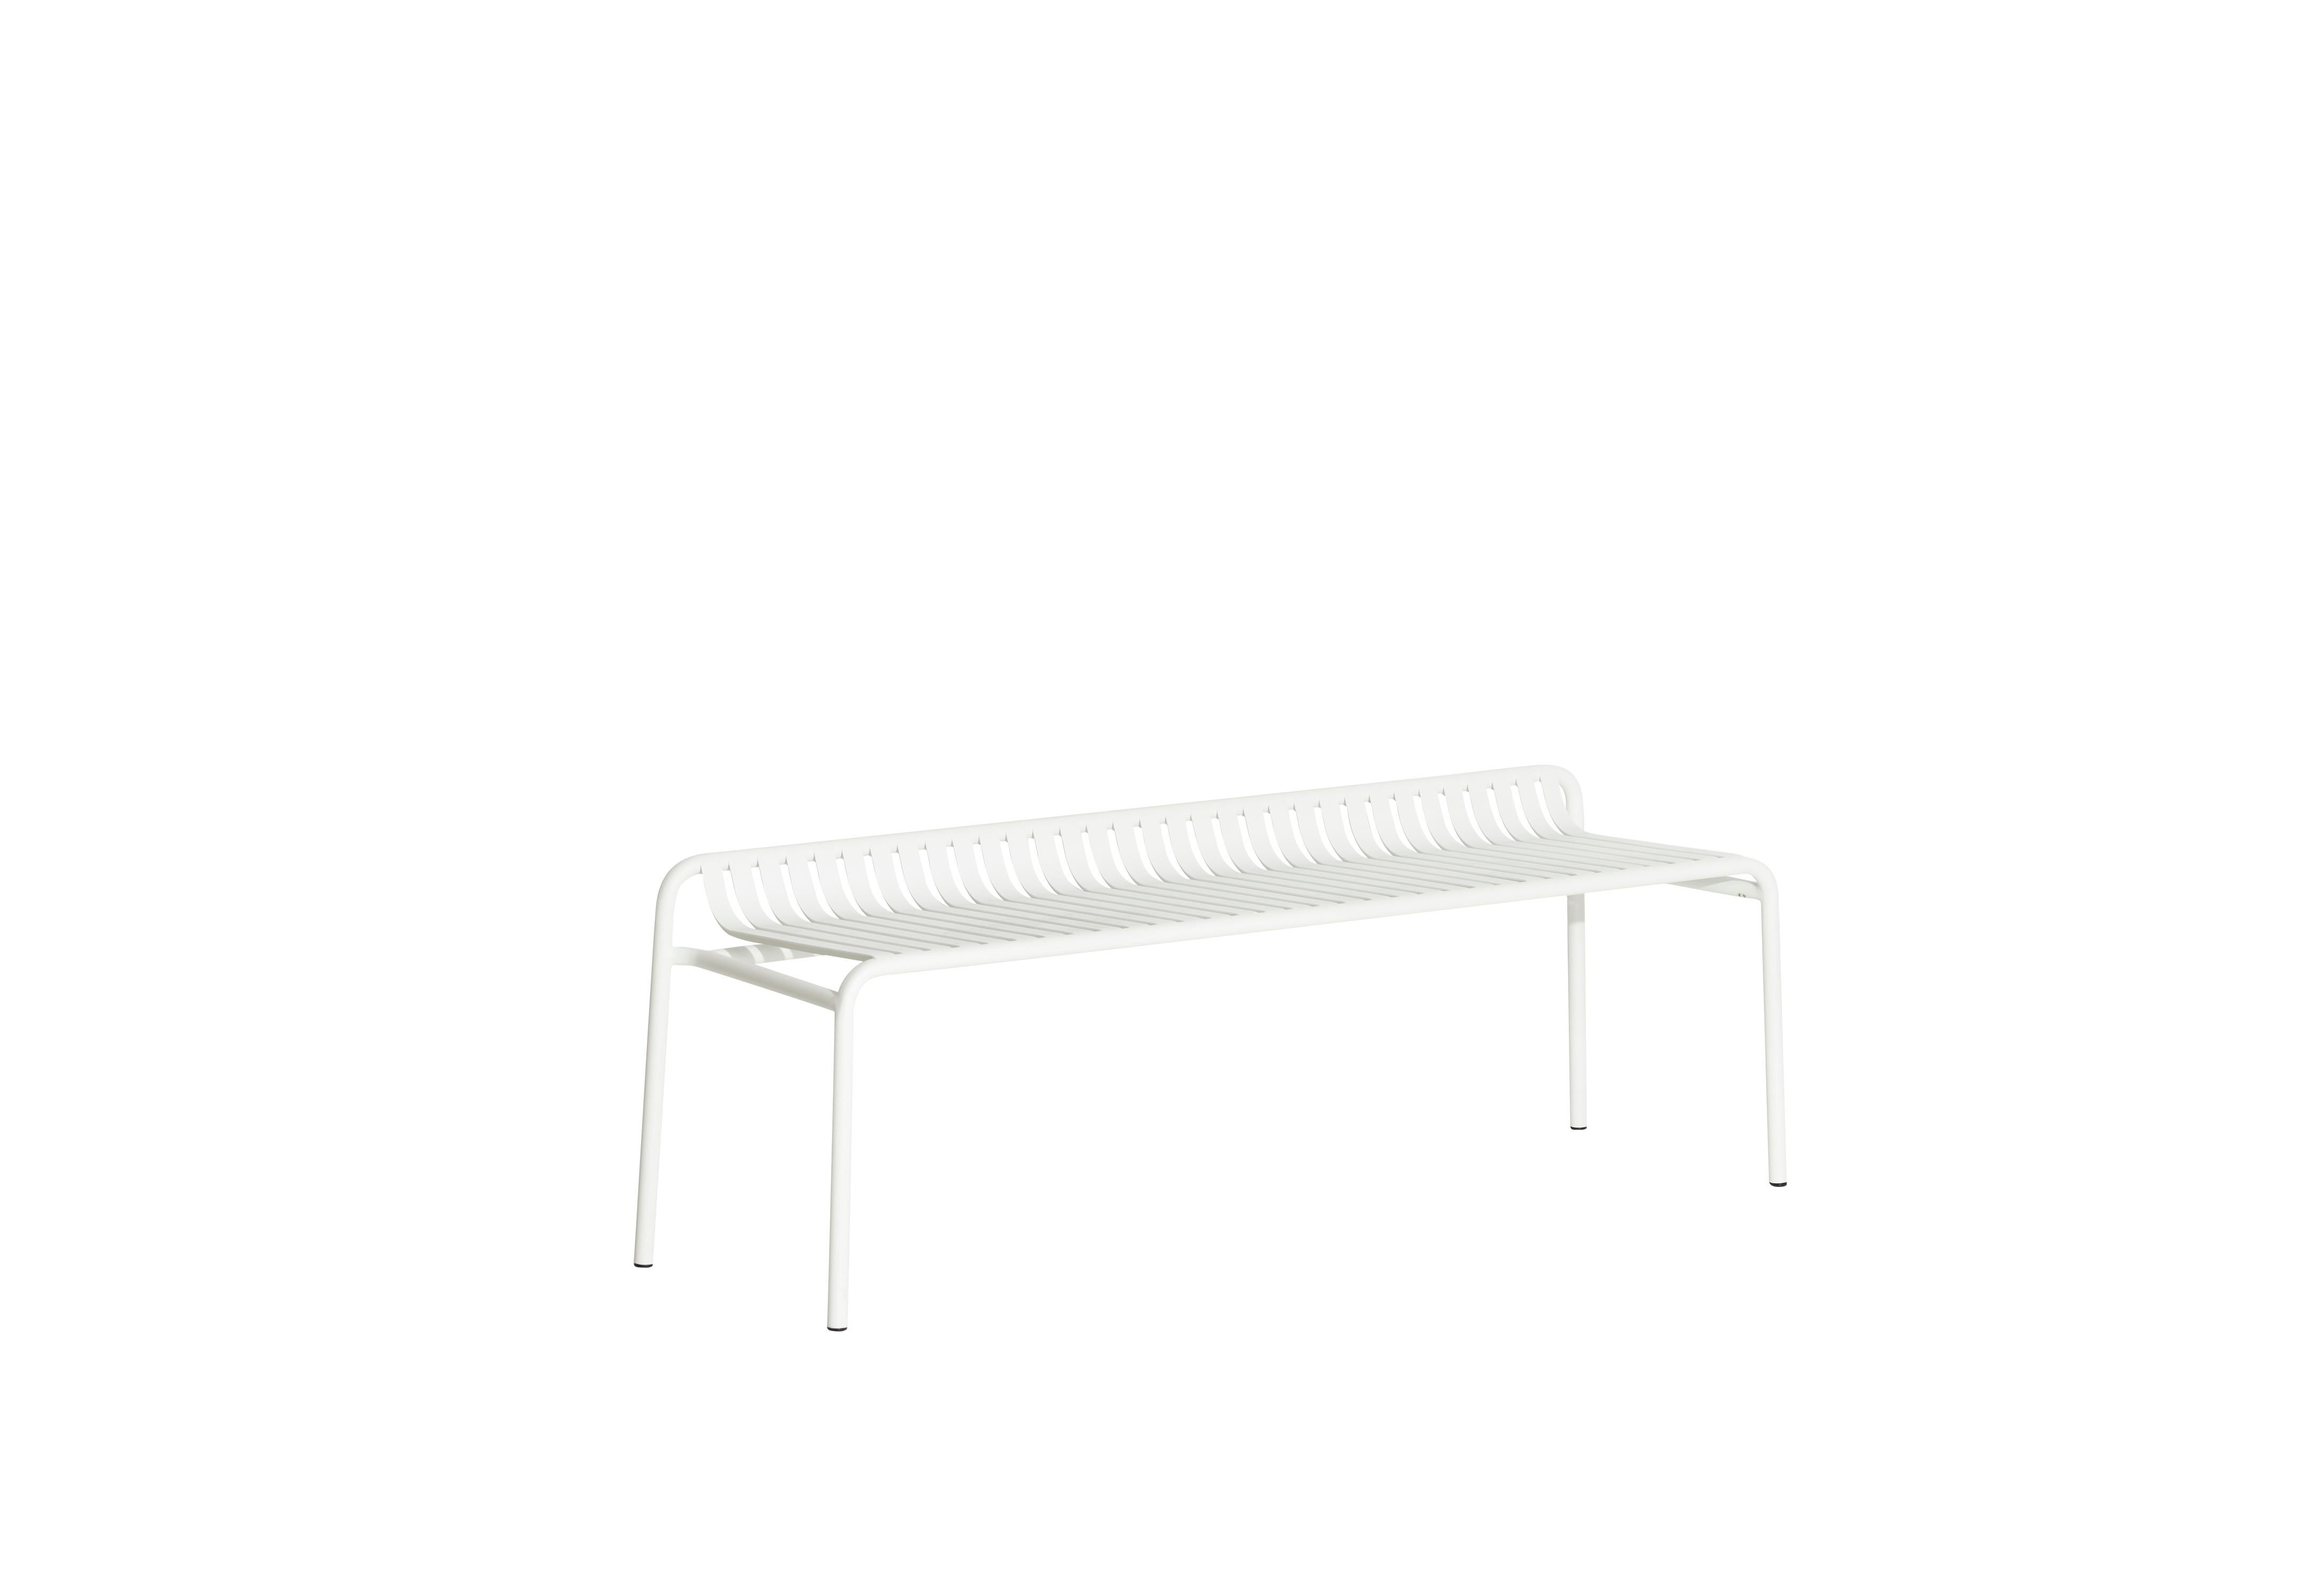 Petite Friture Week-End Bench without Back in White Aluminium by Studio BrichetZiegler, 2017

The week-end collection is a full range of outdoor furniture, in aluminium grained epoxy paint, matt finish, that includes 18 functions and 8 colours for